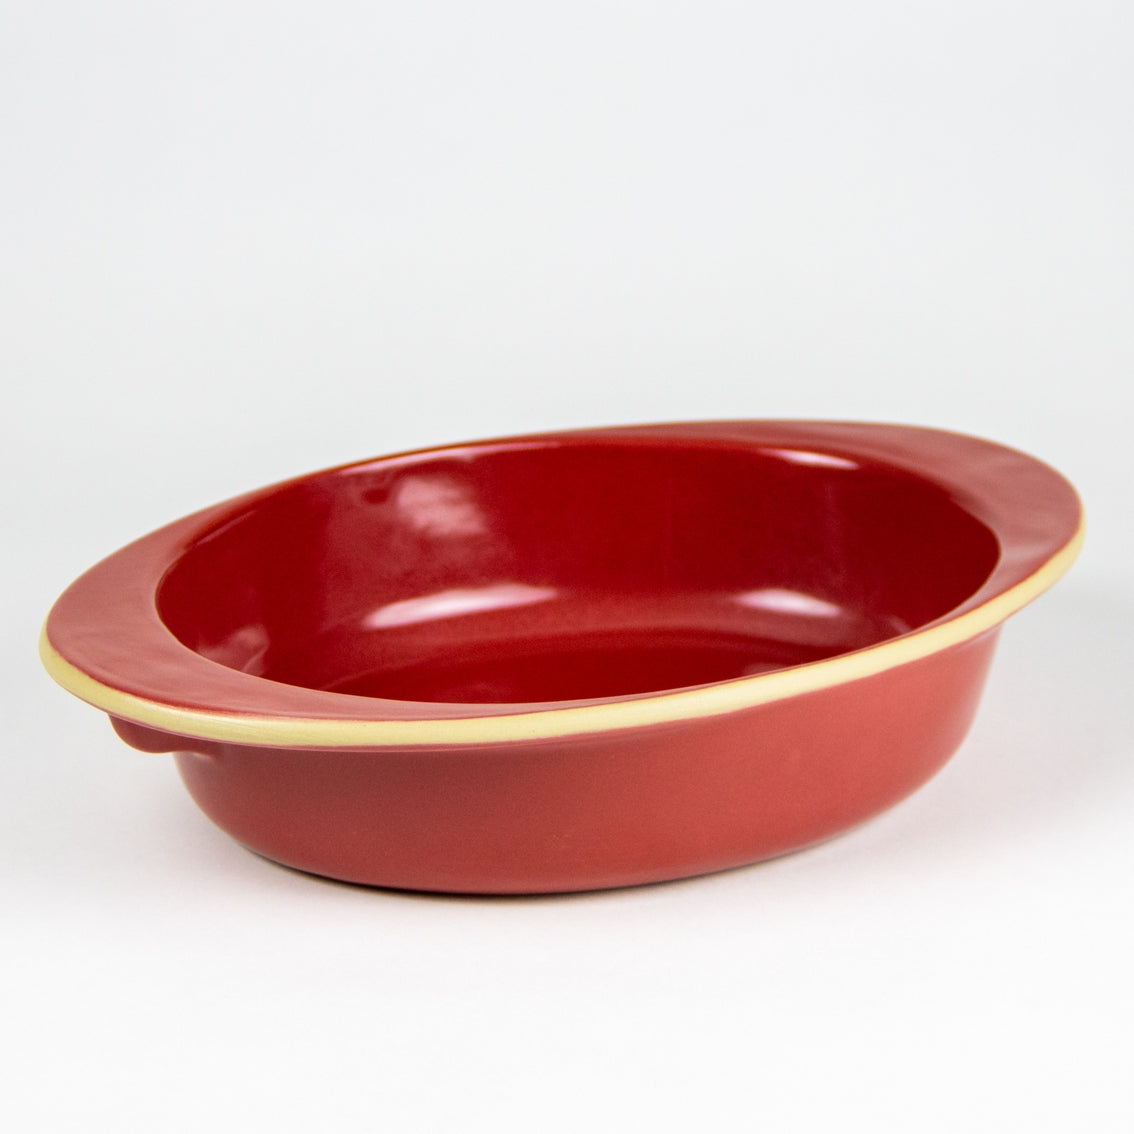 Vibrant red oval stoneware baking dish. Oven safe bakeware. 